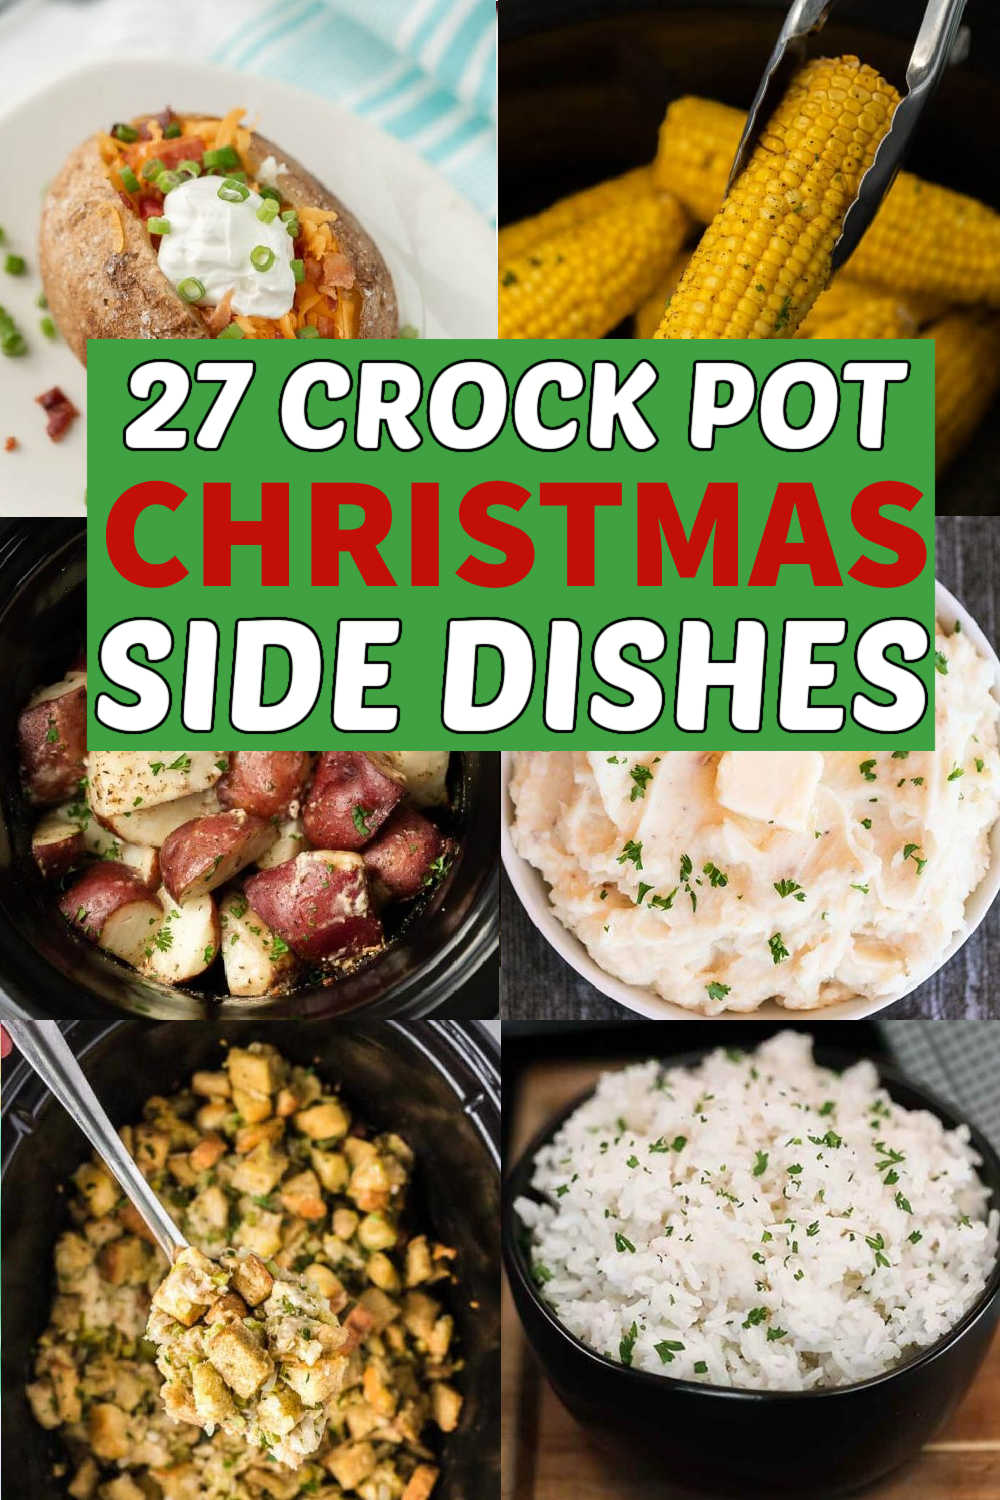 If you looking for Crockpot Side Dishes for Christmas these 27 recipes will help. From dips to mac and cheese these dishes are easy to make. Save room in your oven and make your side dishes in the slow cooker. #eatingonadime #christmassidedishes #crockpotrecipes